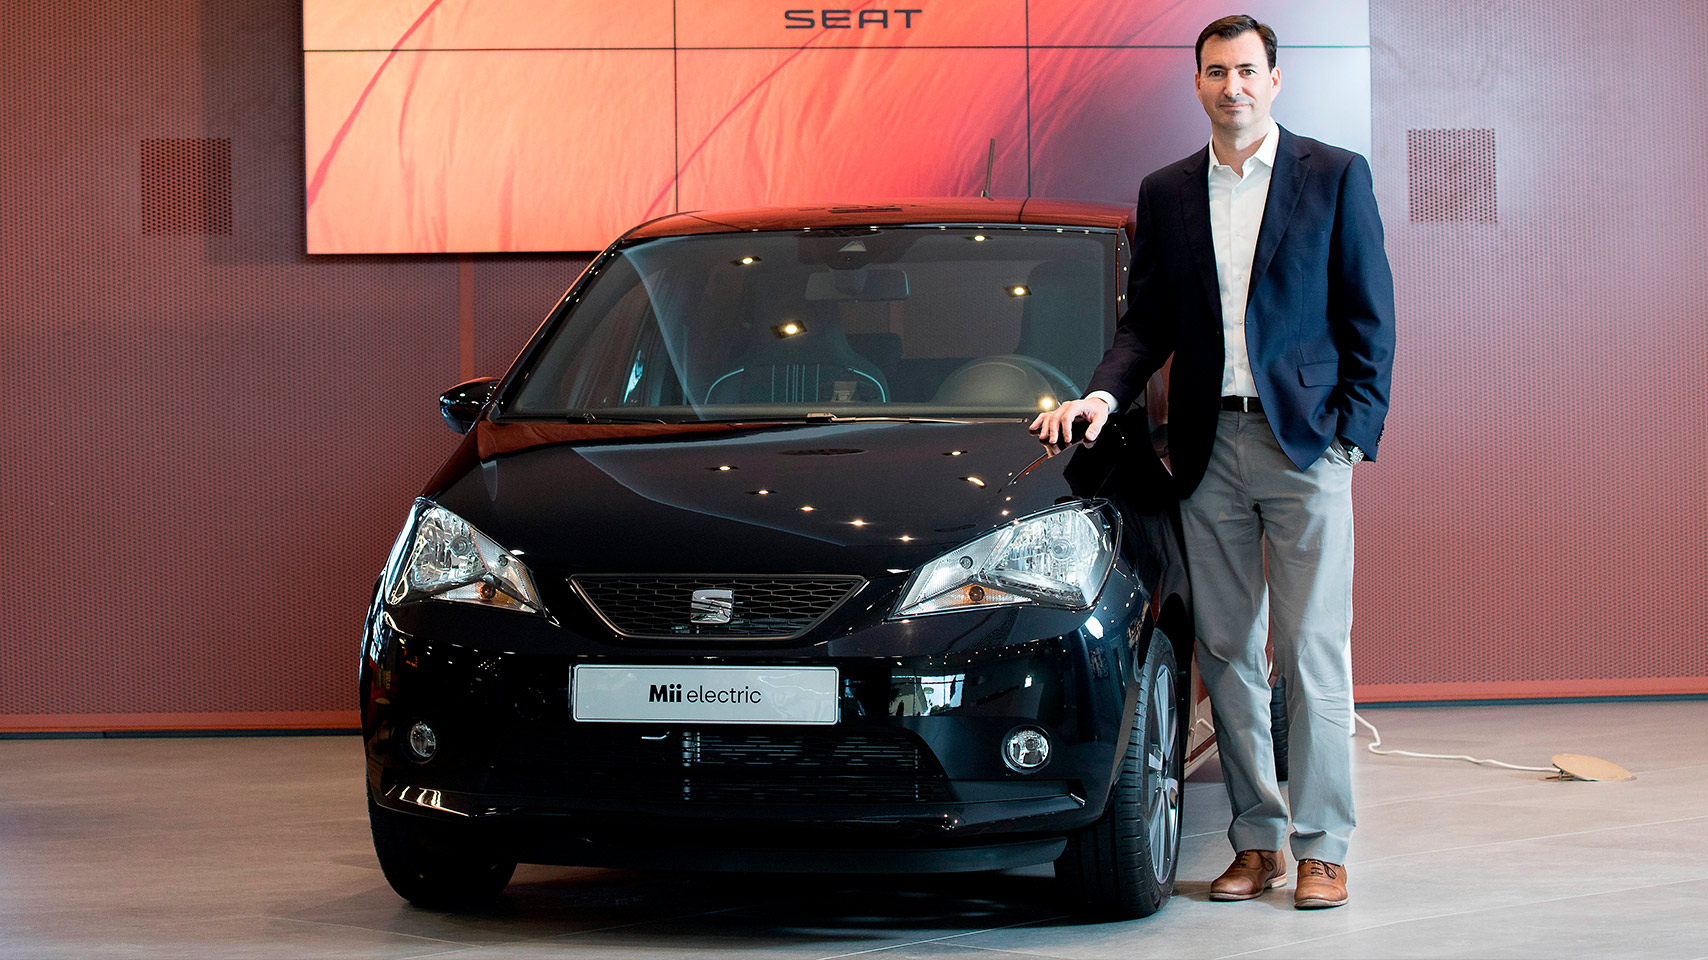 SEAT appoints Fernando Salvador, Global Head of Product & Events communications